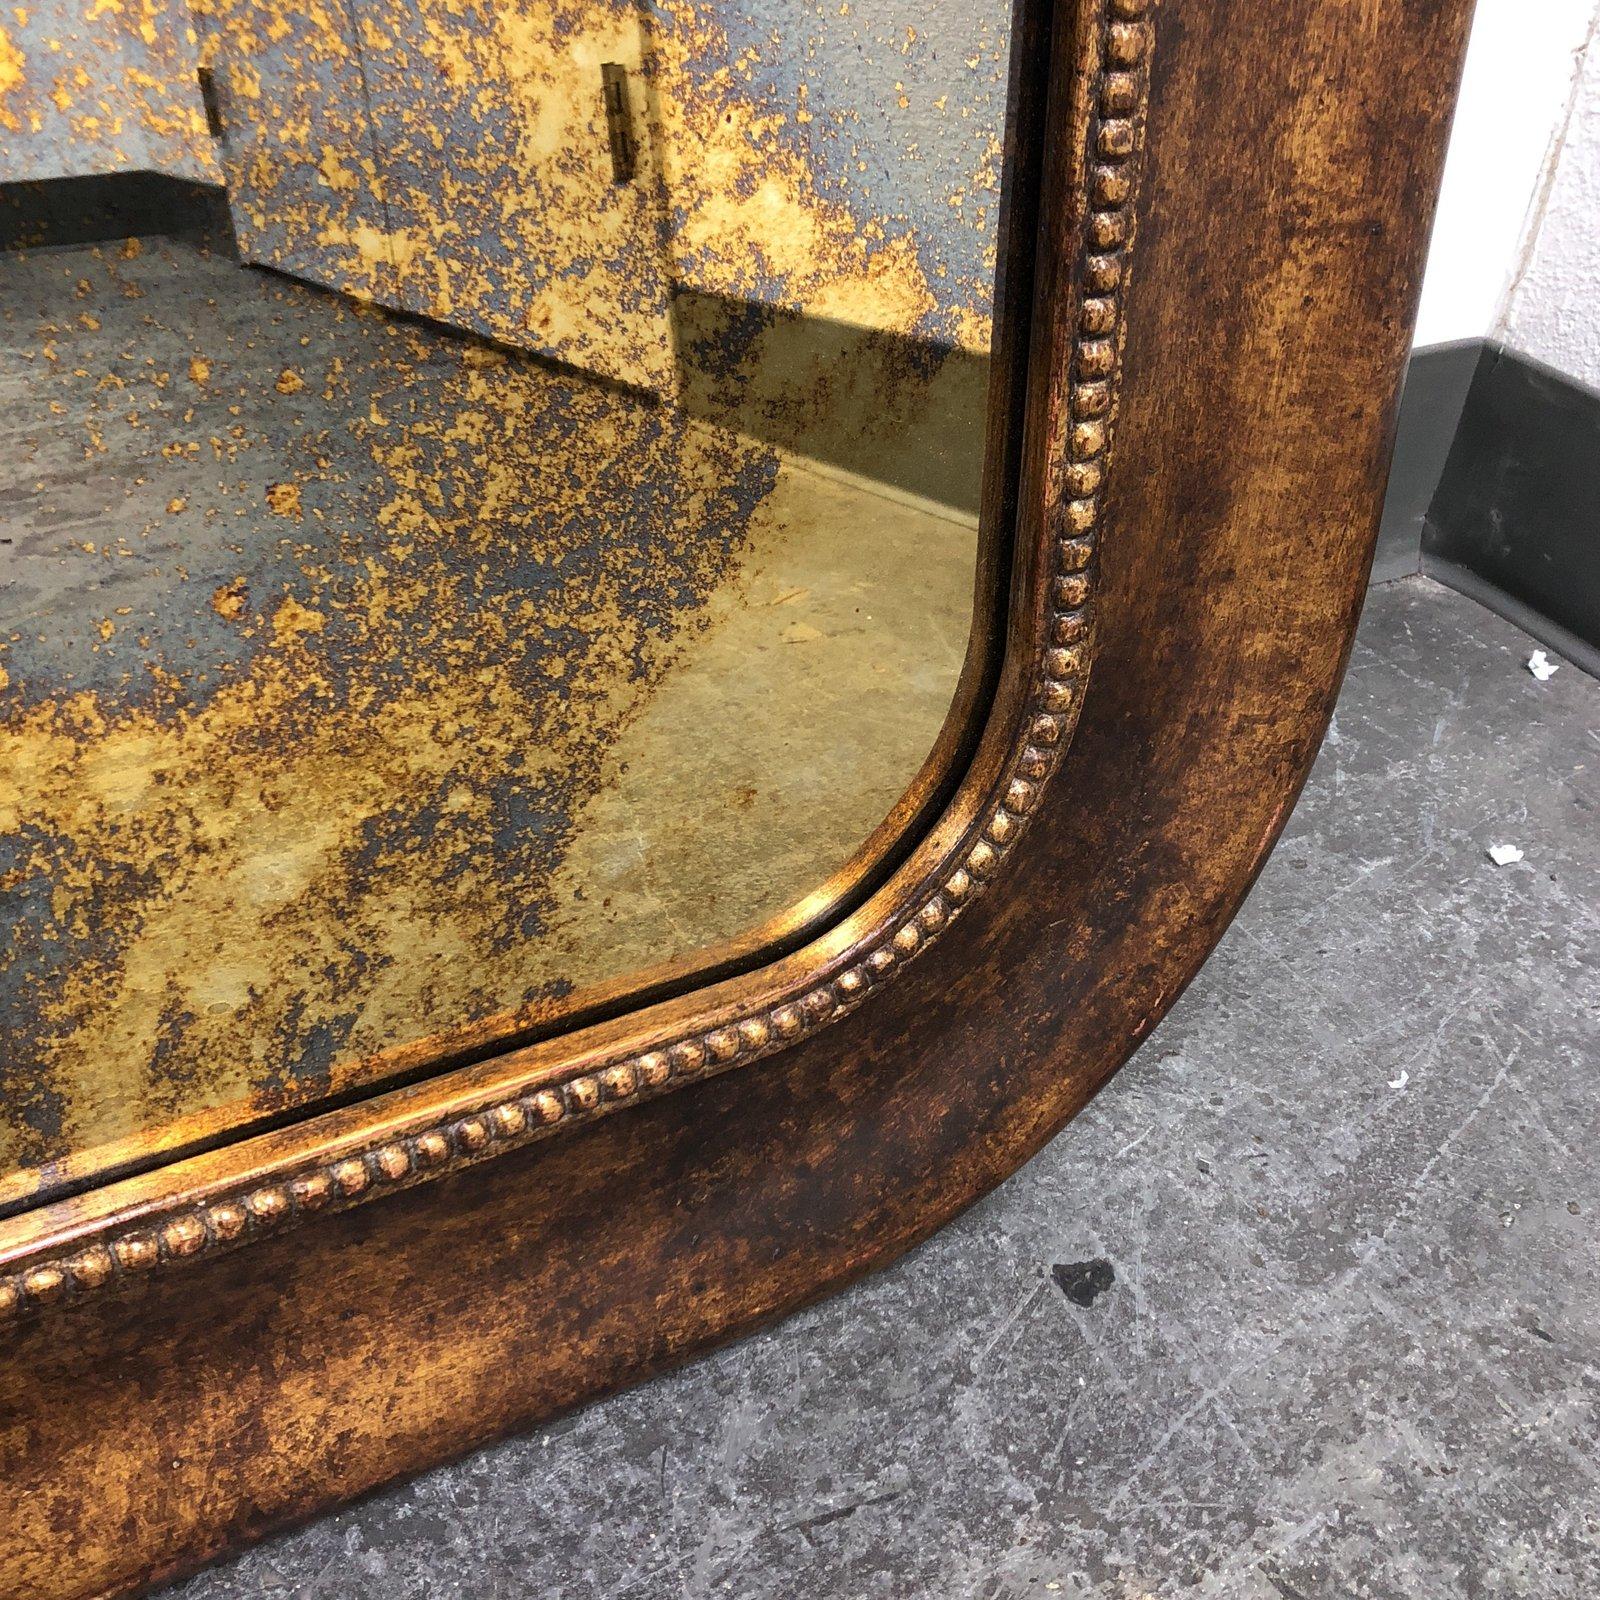 Aa wood frame framed wall mirror. The frame is wood with a nailhead trim border with curved ends in a distressed gold finish. The mirror has an antiqued finish. Wall mirror hangs horizontal.
 